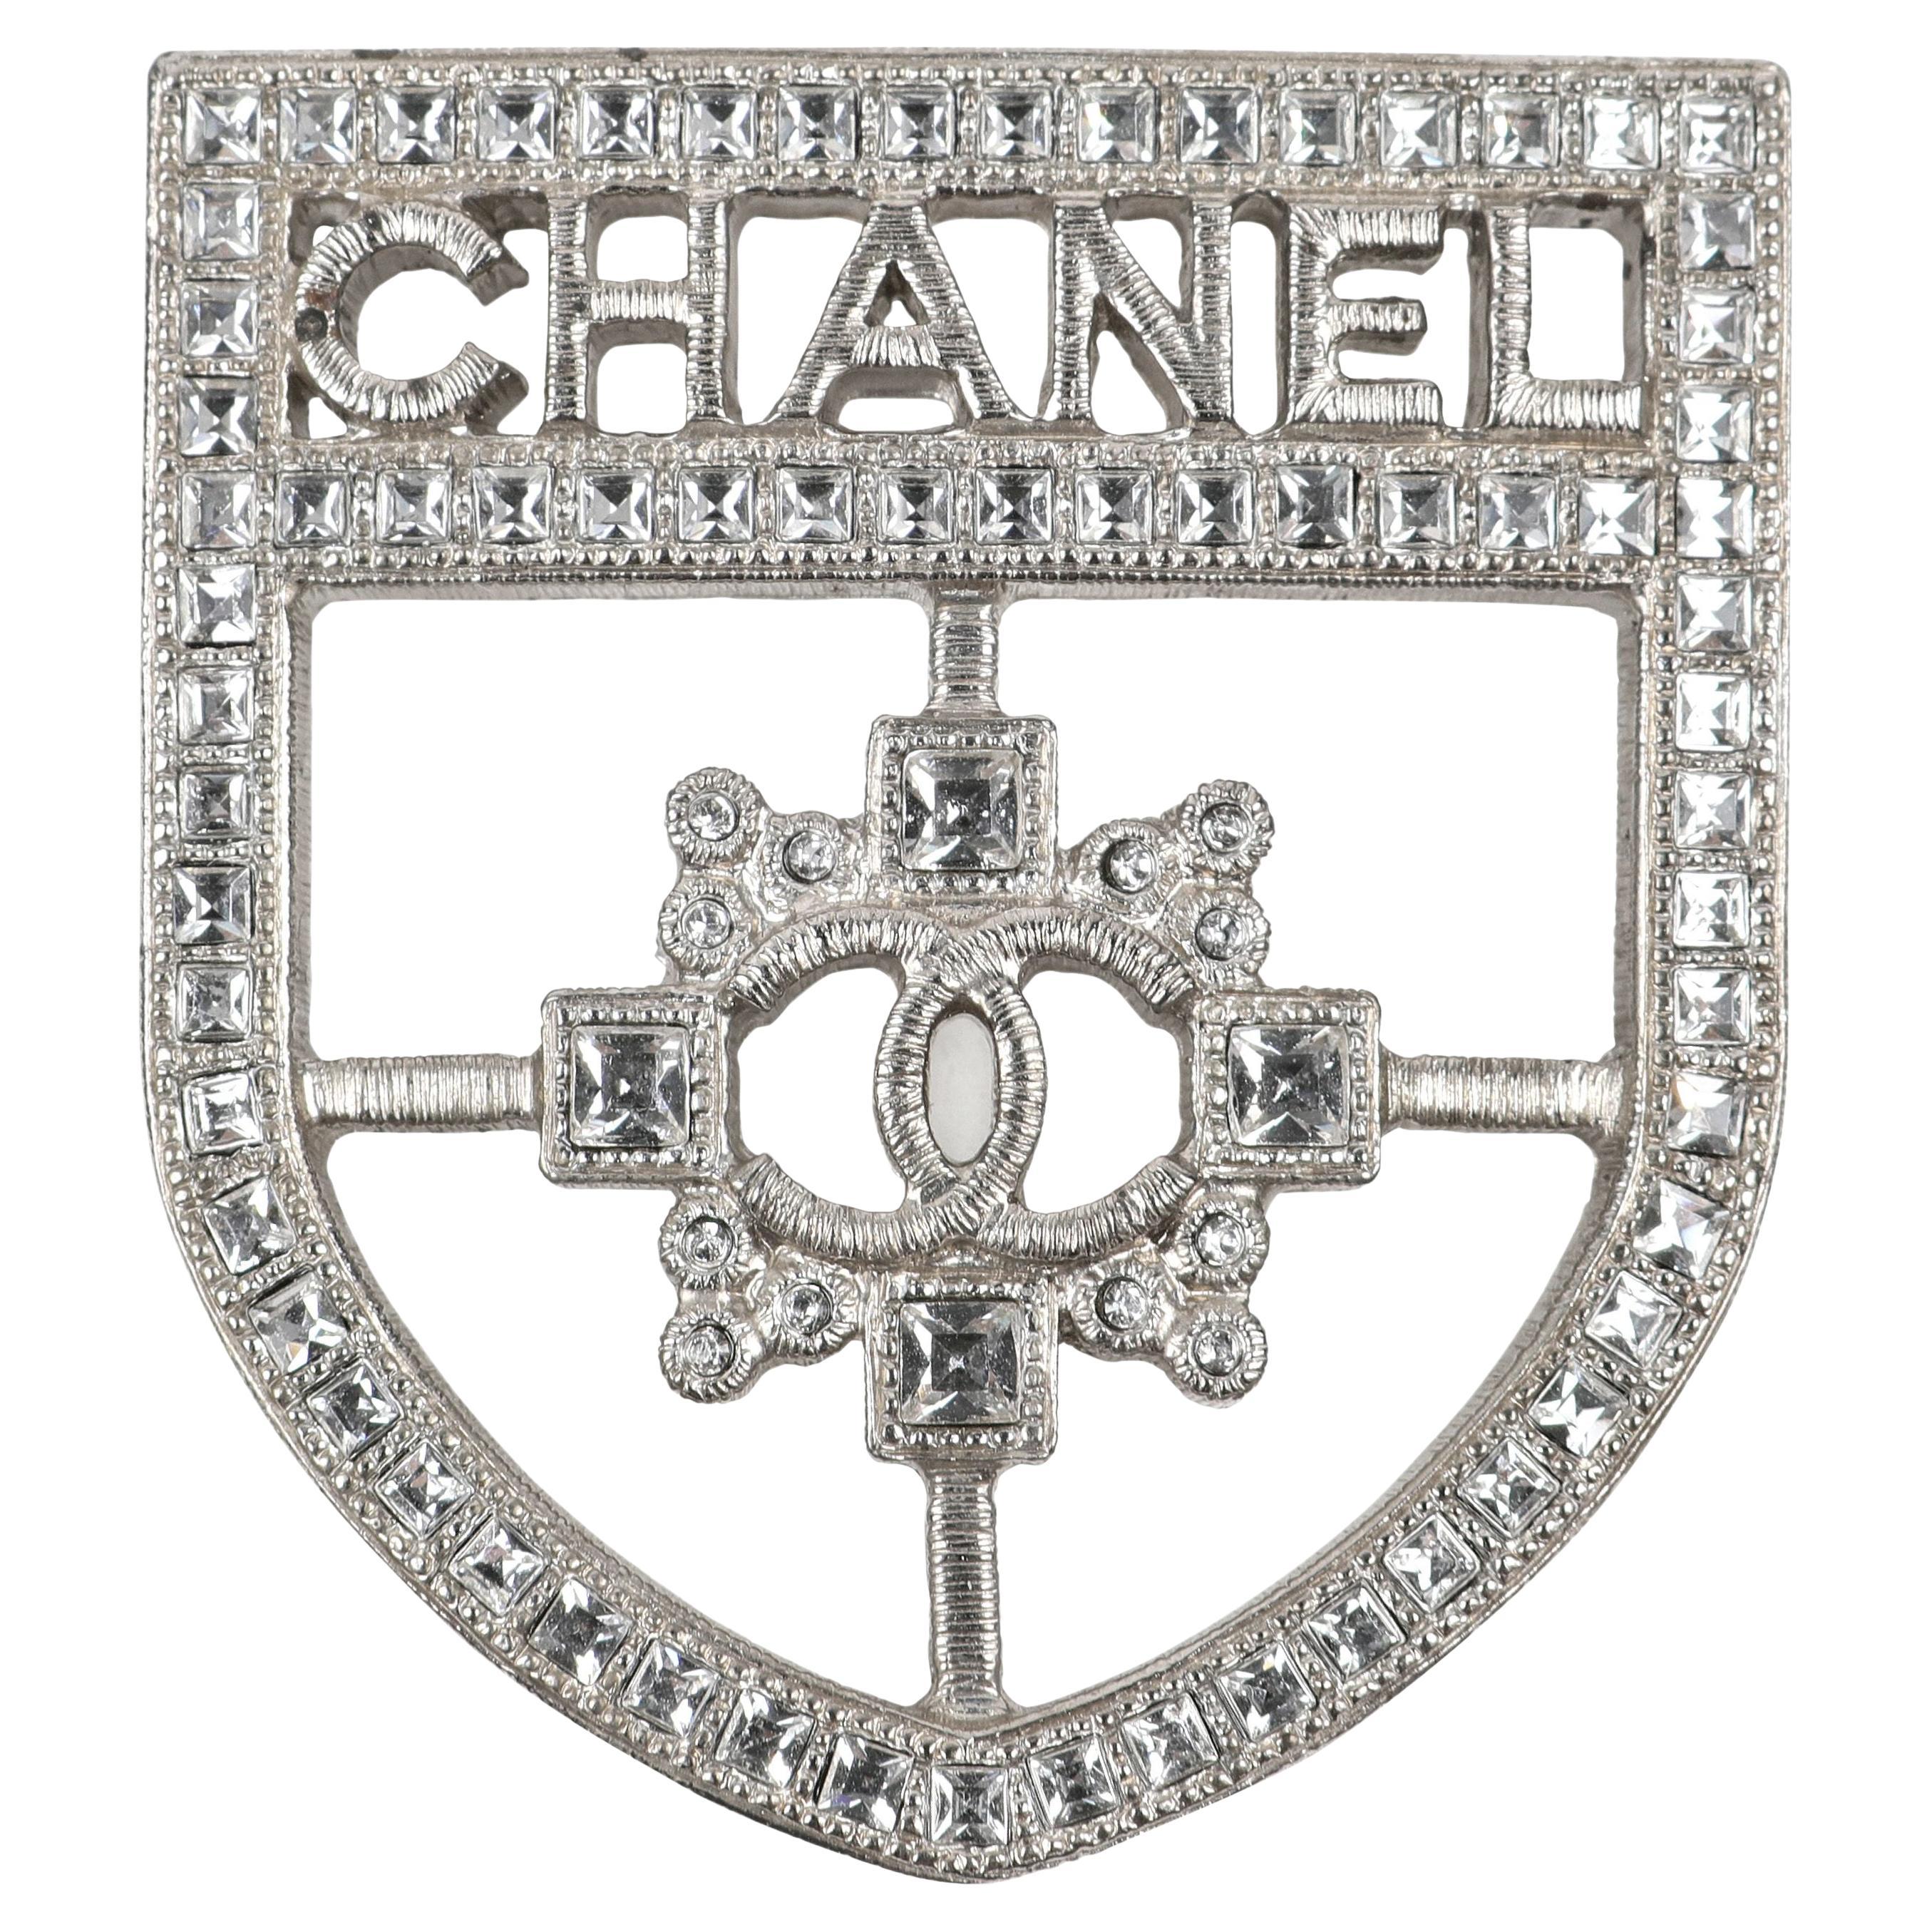 How do I authenticate a Chanel brooch?